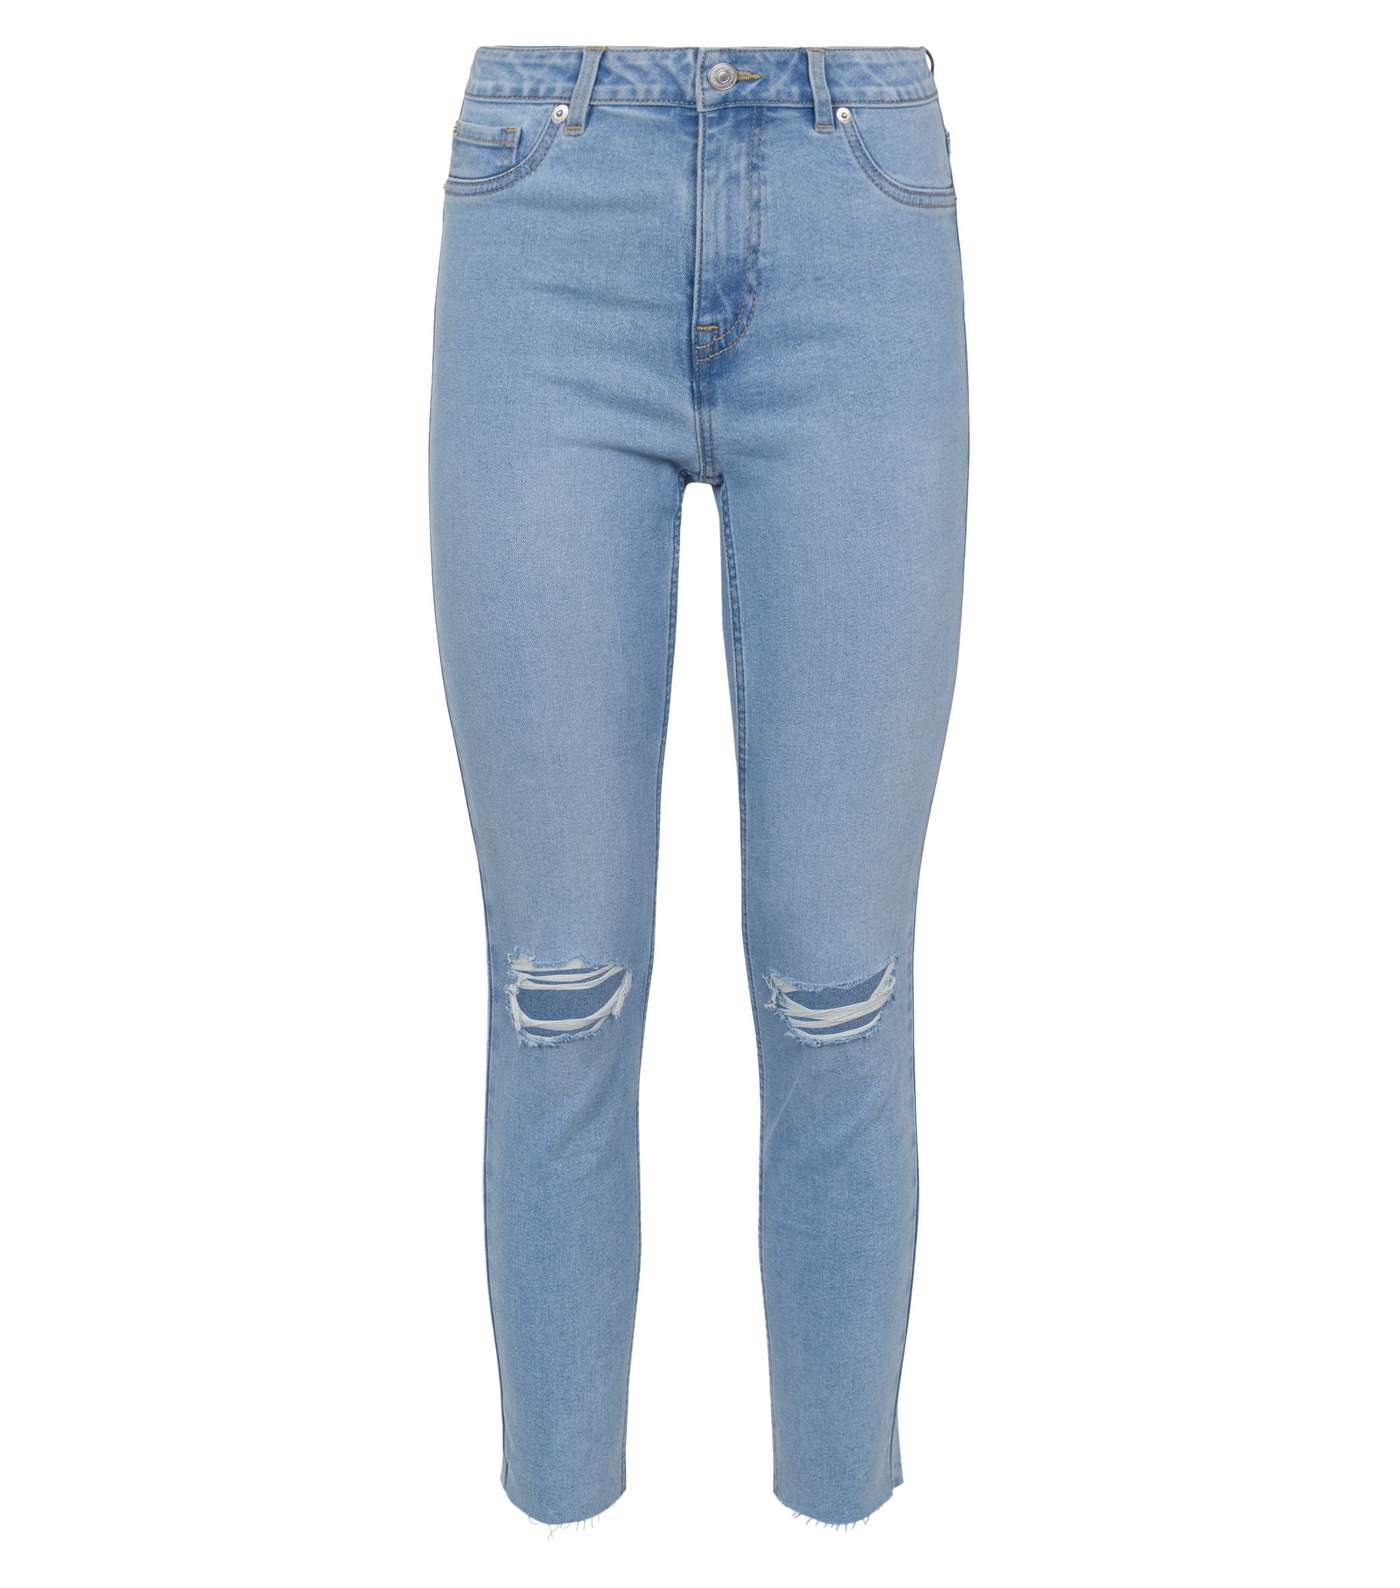 Bright Blue Bleach Wash Ripped Jenna Jeans Image 4